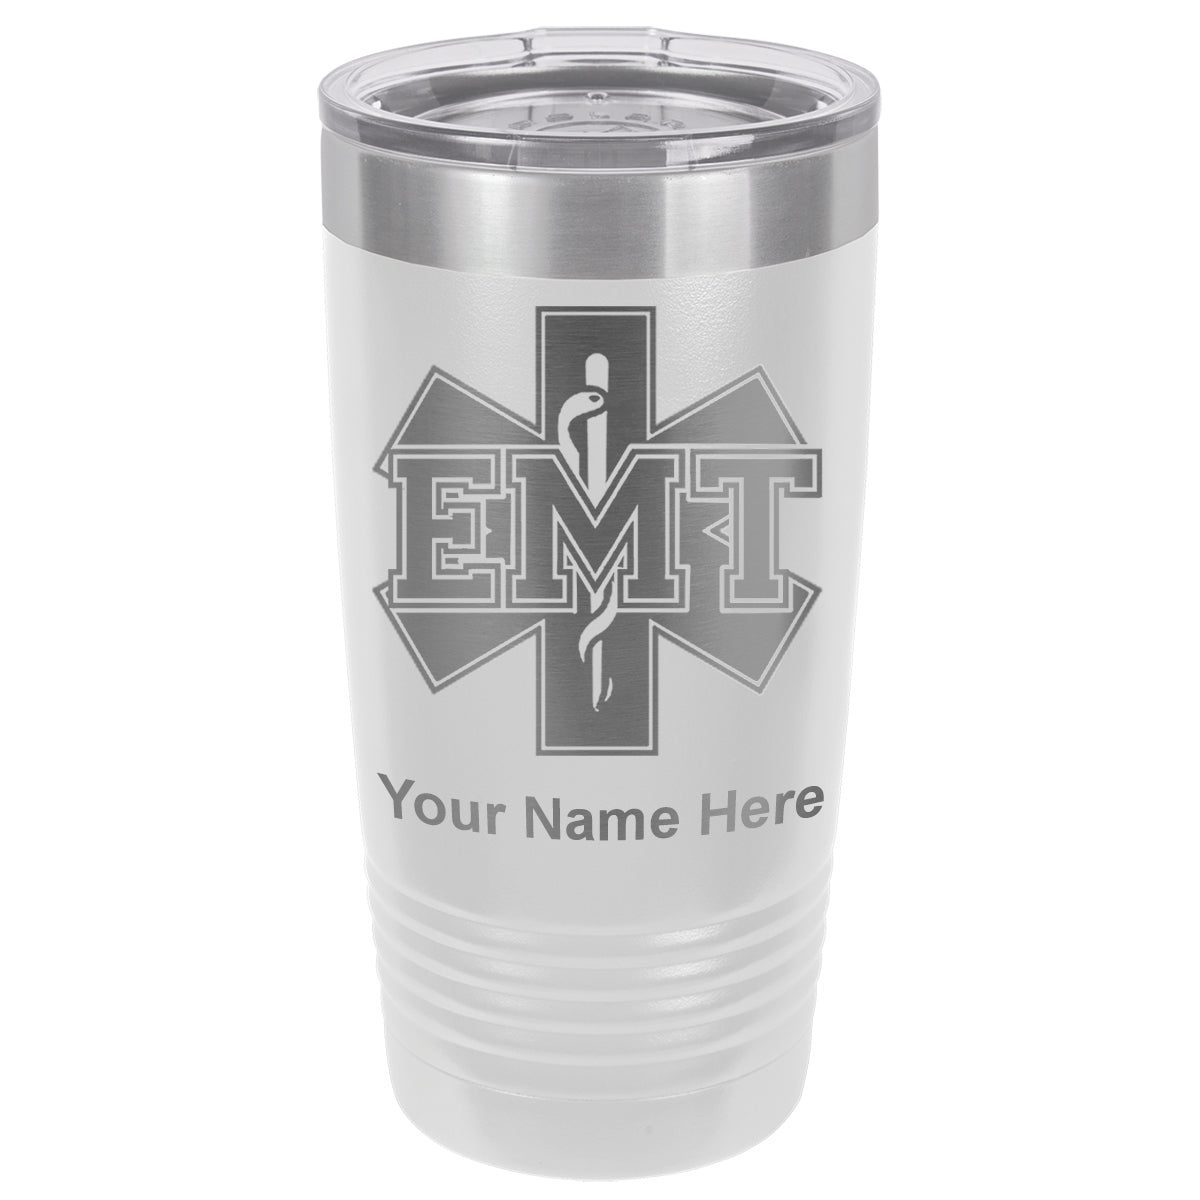 20oz Vacuum Insulated Tumbler Mug, EMT Emergency Medical Technician, Personalized Engraving Included